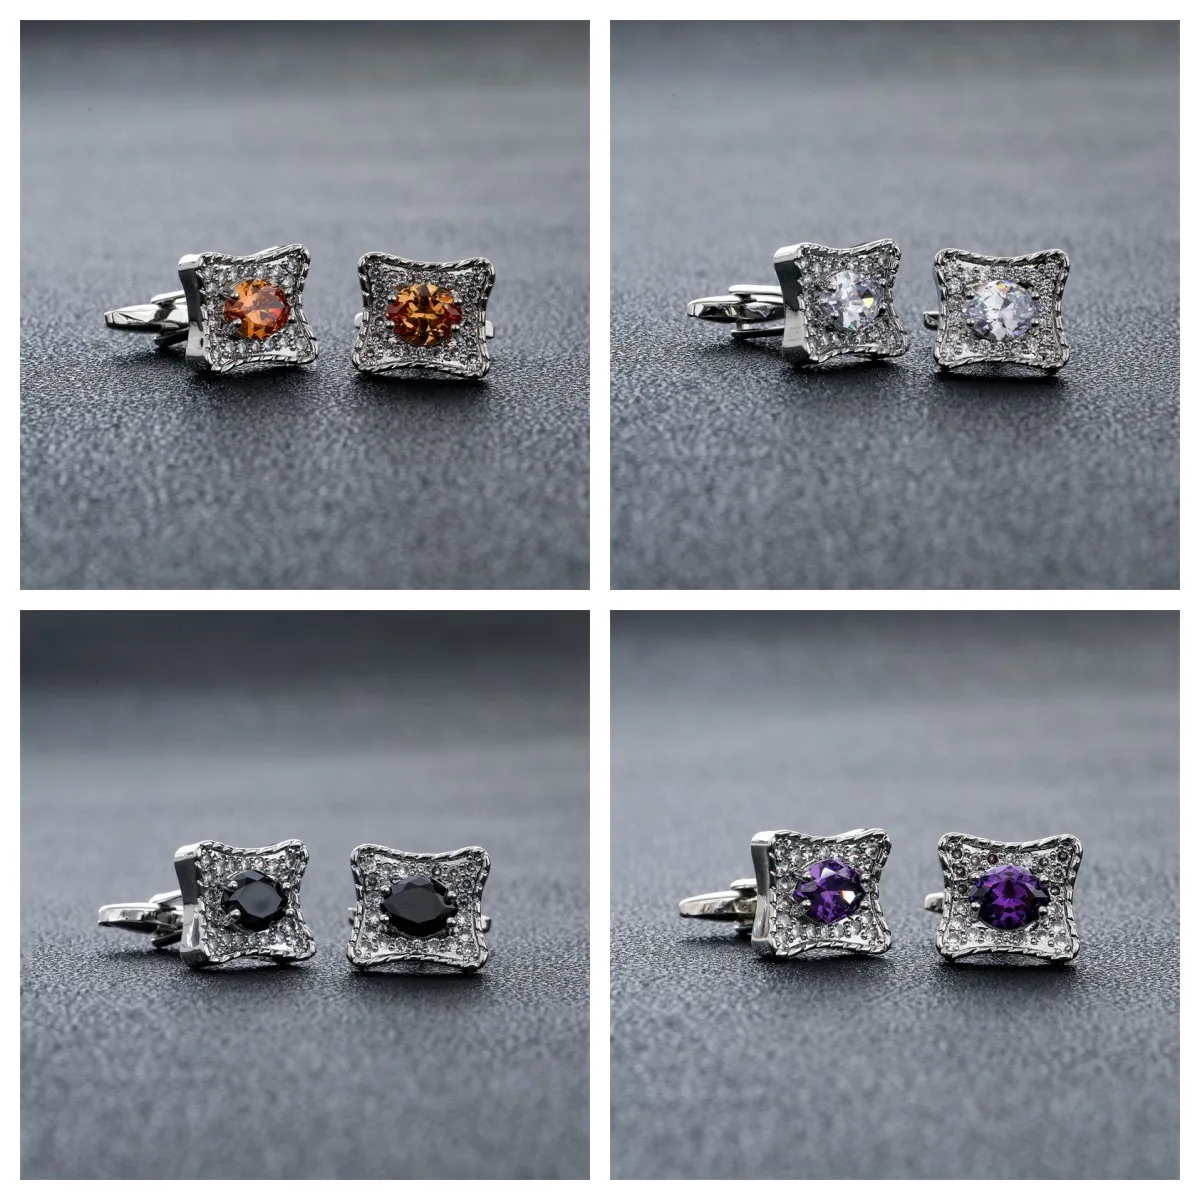 

New crystal cufflinks silver bow tie austrian french square inlaid light luxury cufflinks spot factory direct sales